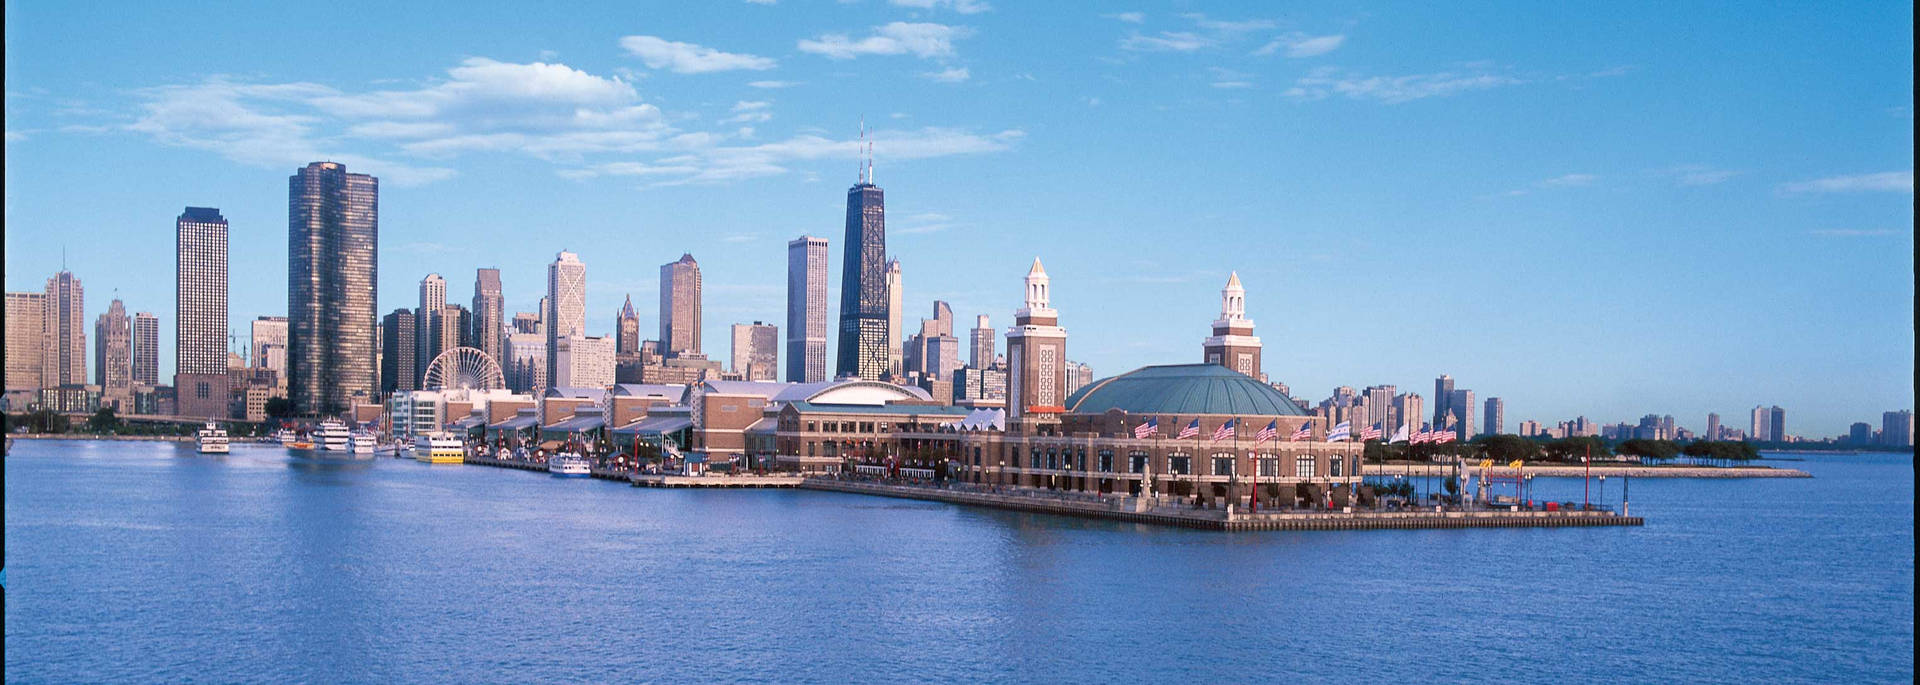 Majestic View of Navy Pier Headhouse against Chicago Skyline Wallpaper